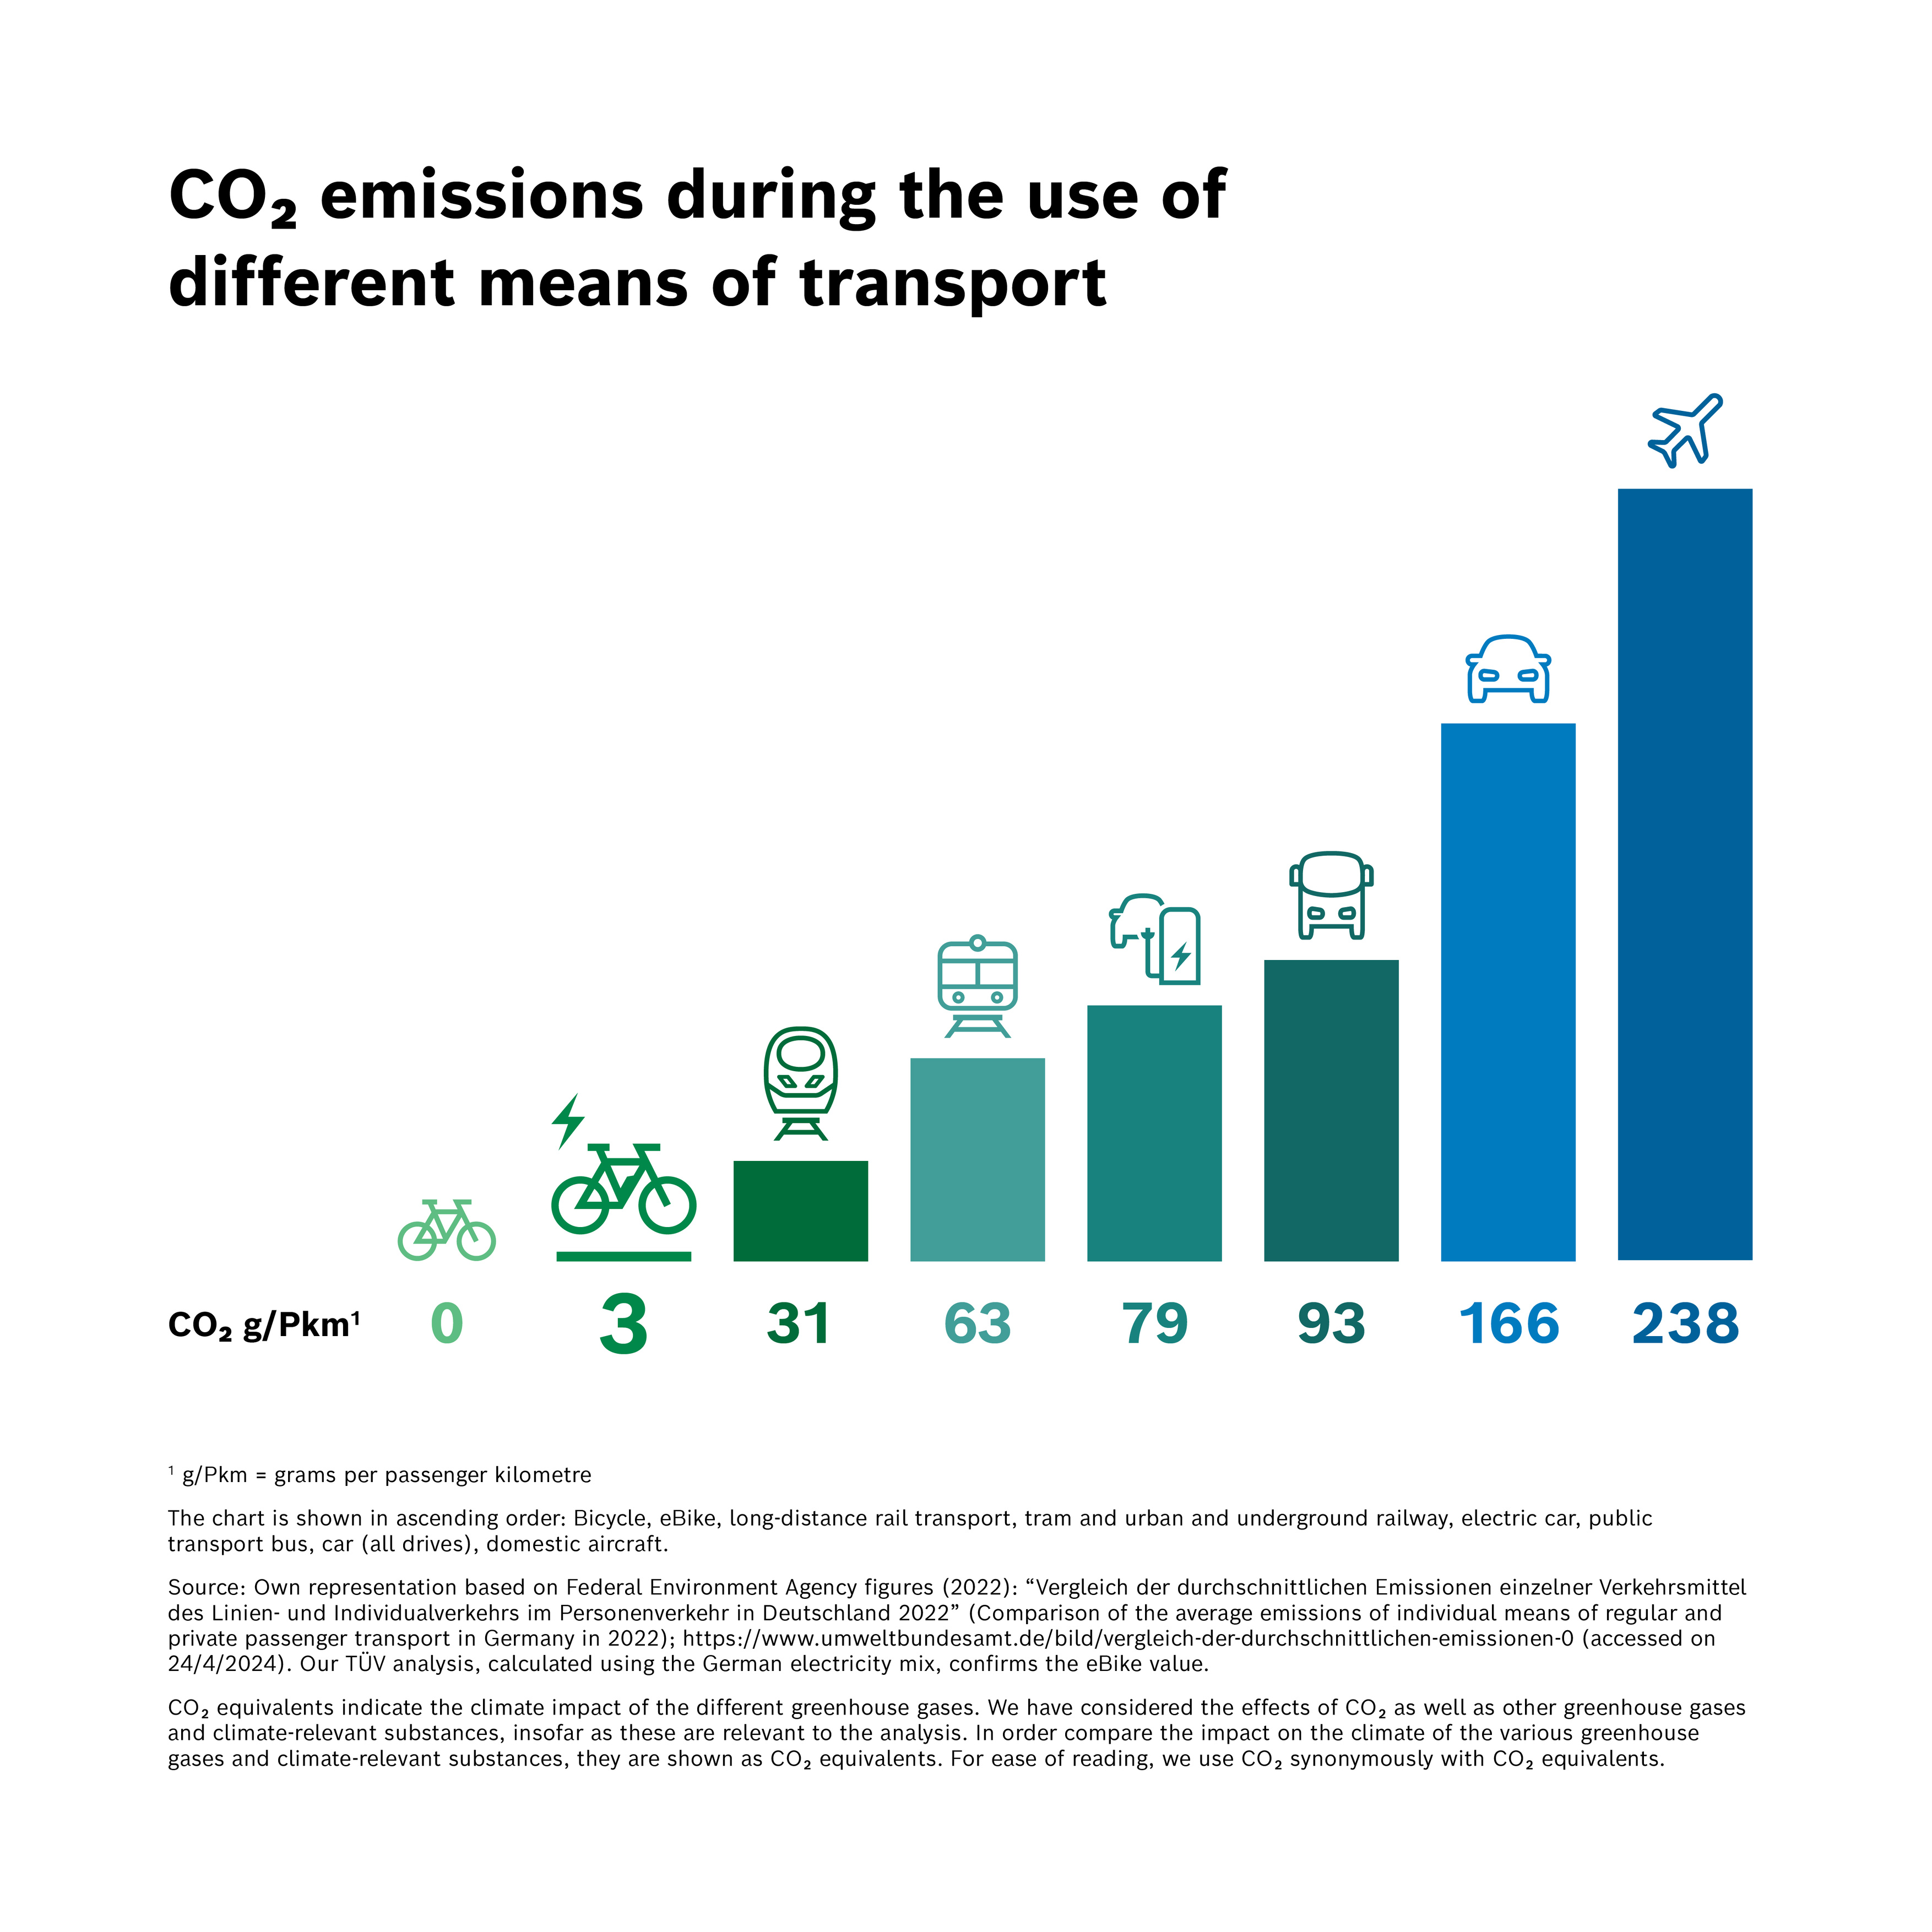 CO2 emissions during the use of different means of transport